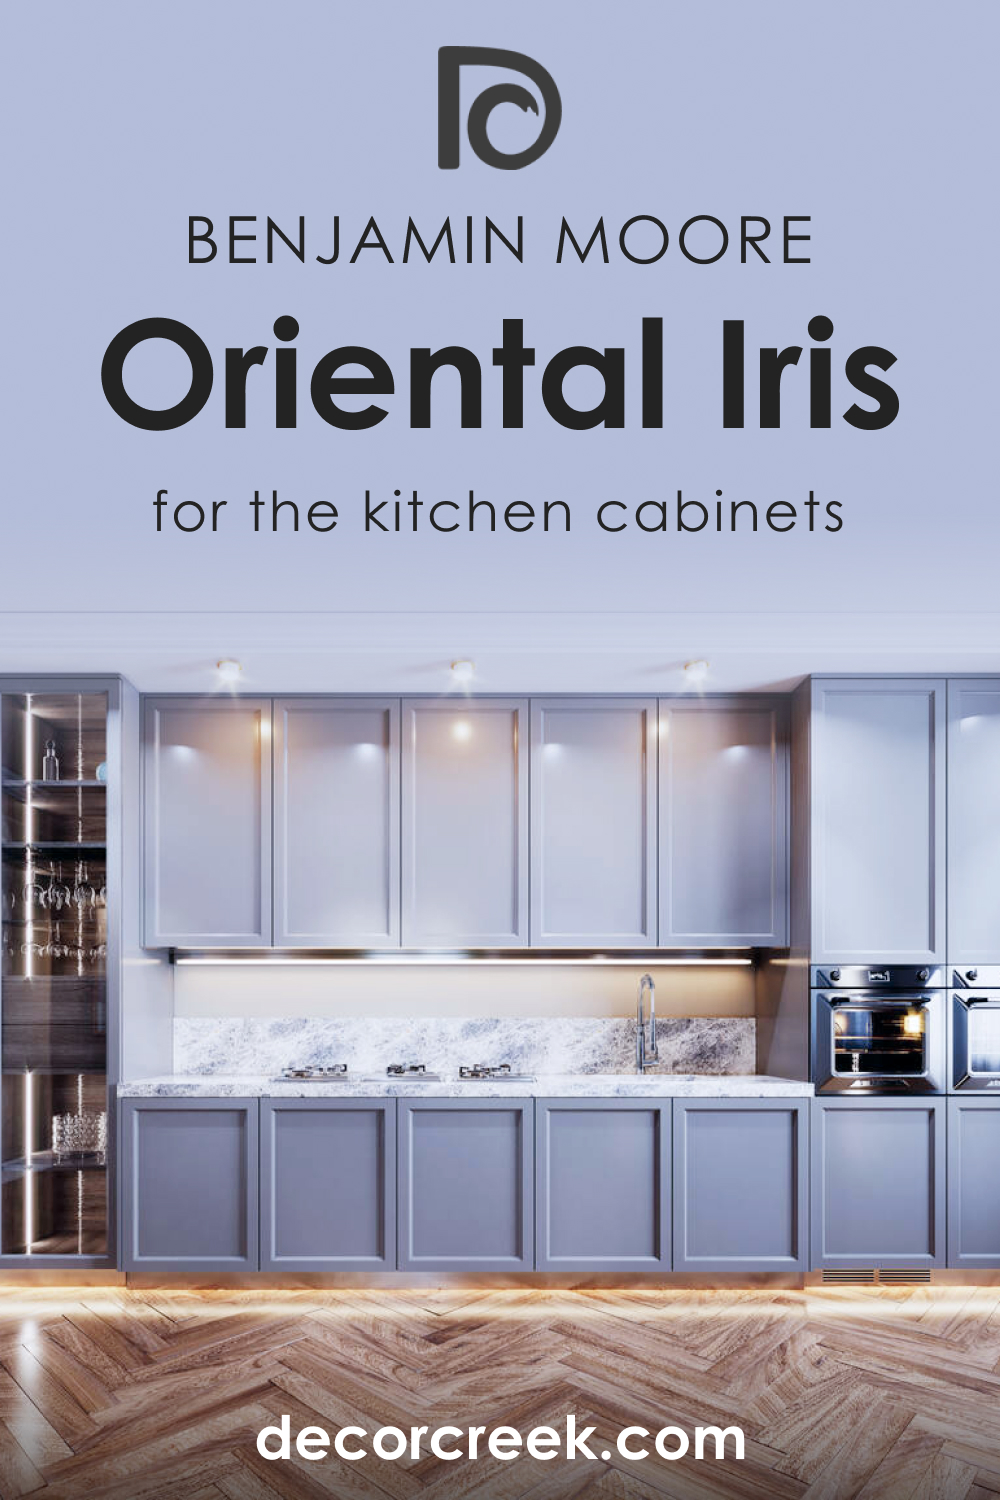 How to Use Oriental Iris 1418 on the Kitchen Cabinets?